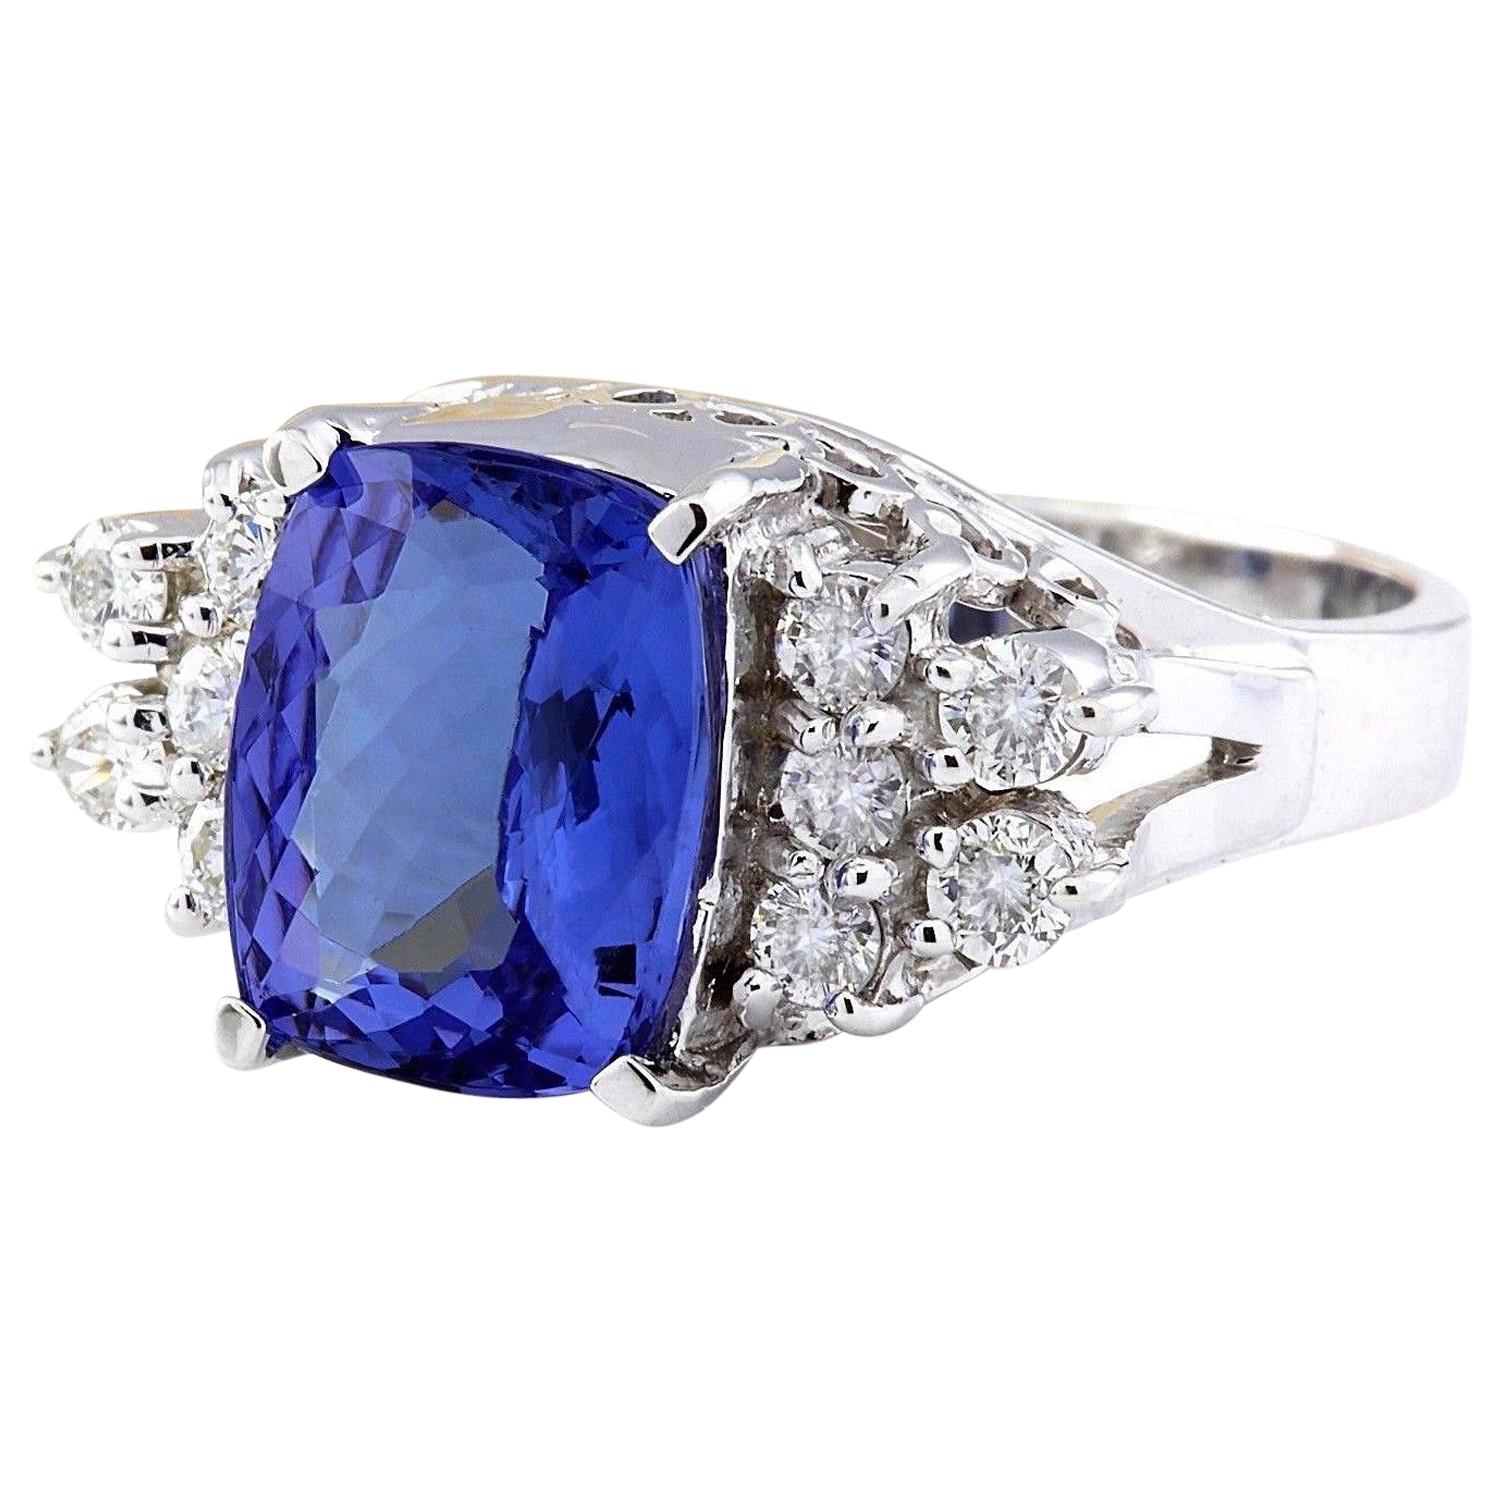 Indulge in the elegance of this 14K solid white gold diamond ring, featuring a genuine tanzanite gemstone weighing 3.05 carats. The cushion-cut stone, measuring 10.00x8.00 mm, exudes a captivating allure. Surrounding the tanzanite are sparkling